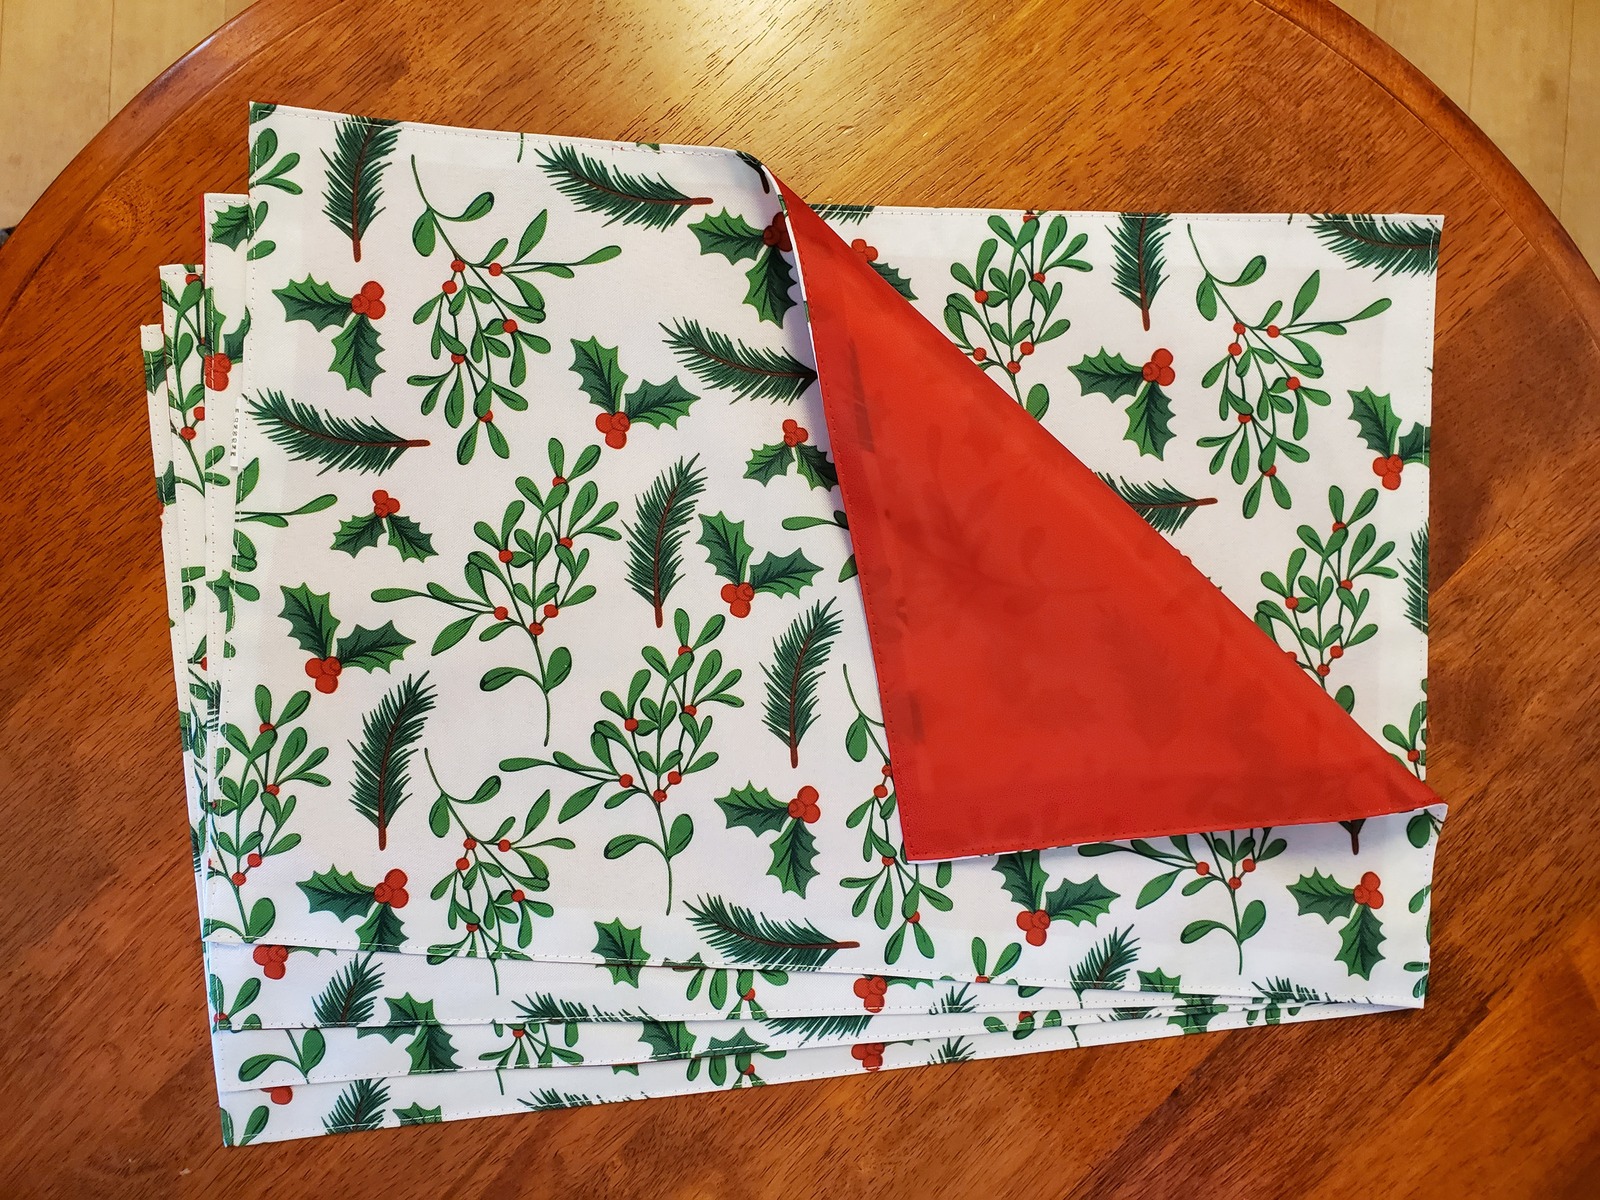 Red Green Christmas Placemats Set of 4 Table Mats Woven Cloth